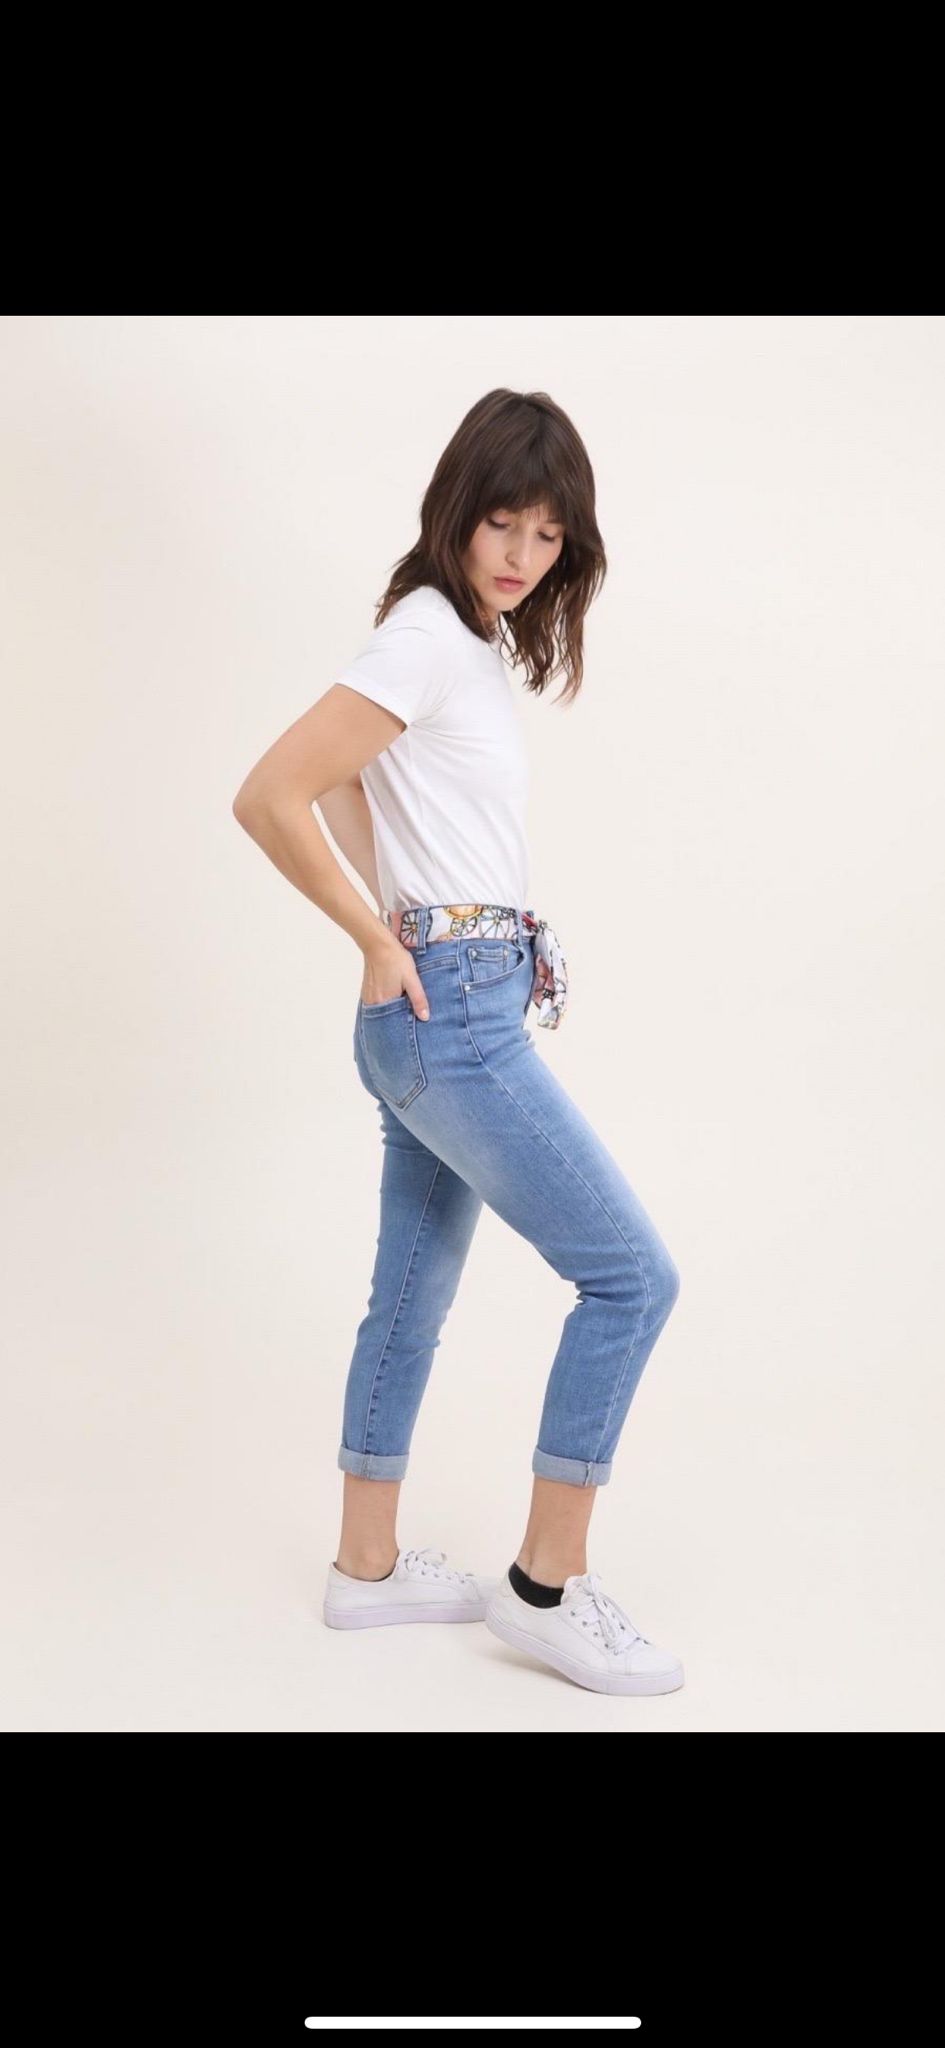 Carly G-Smack Mom Fit Jeans